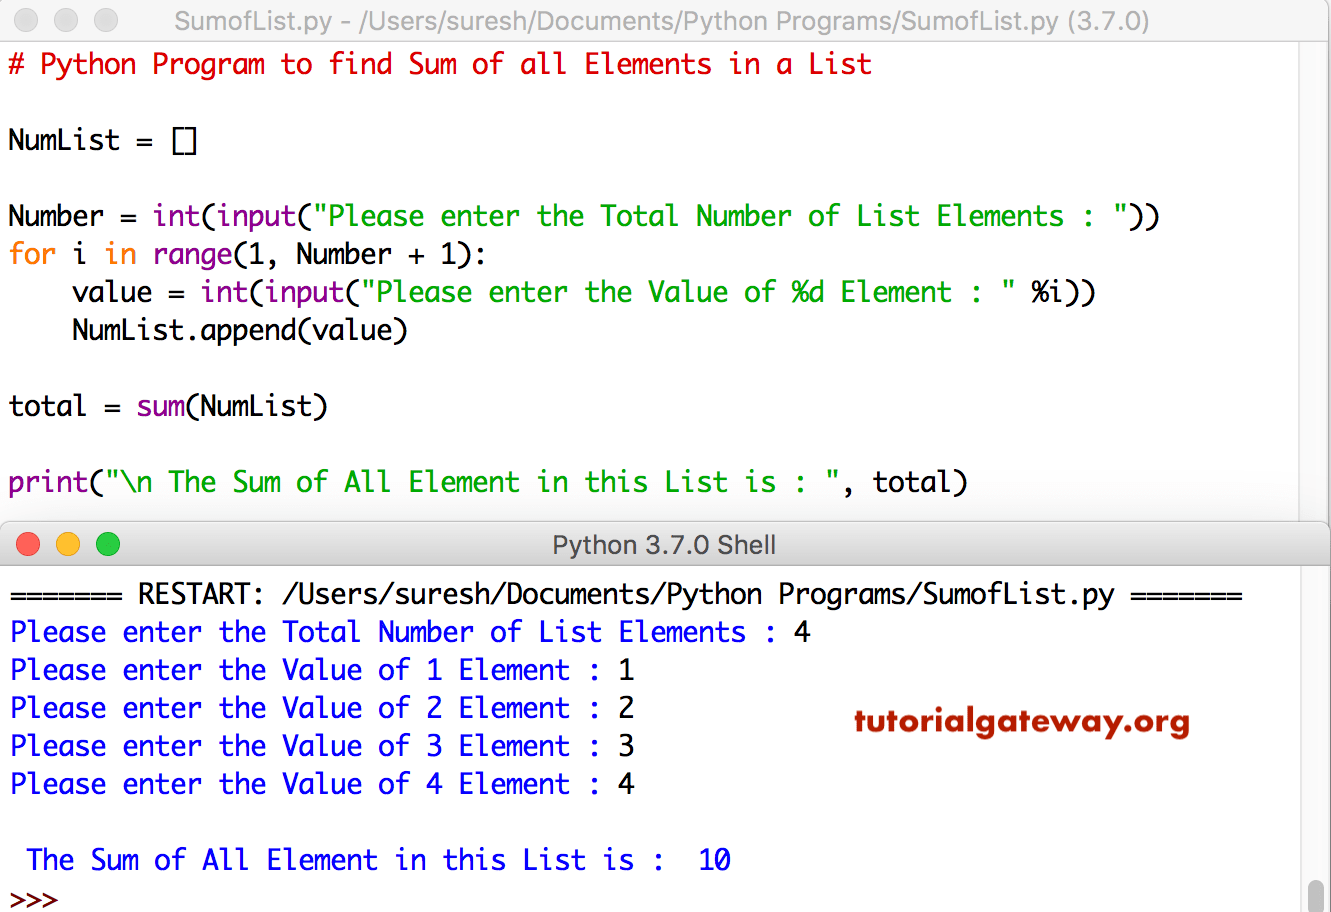 Python Program to find Sum of Elements in a List